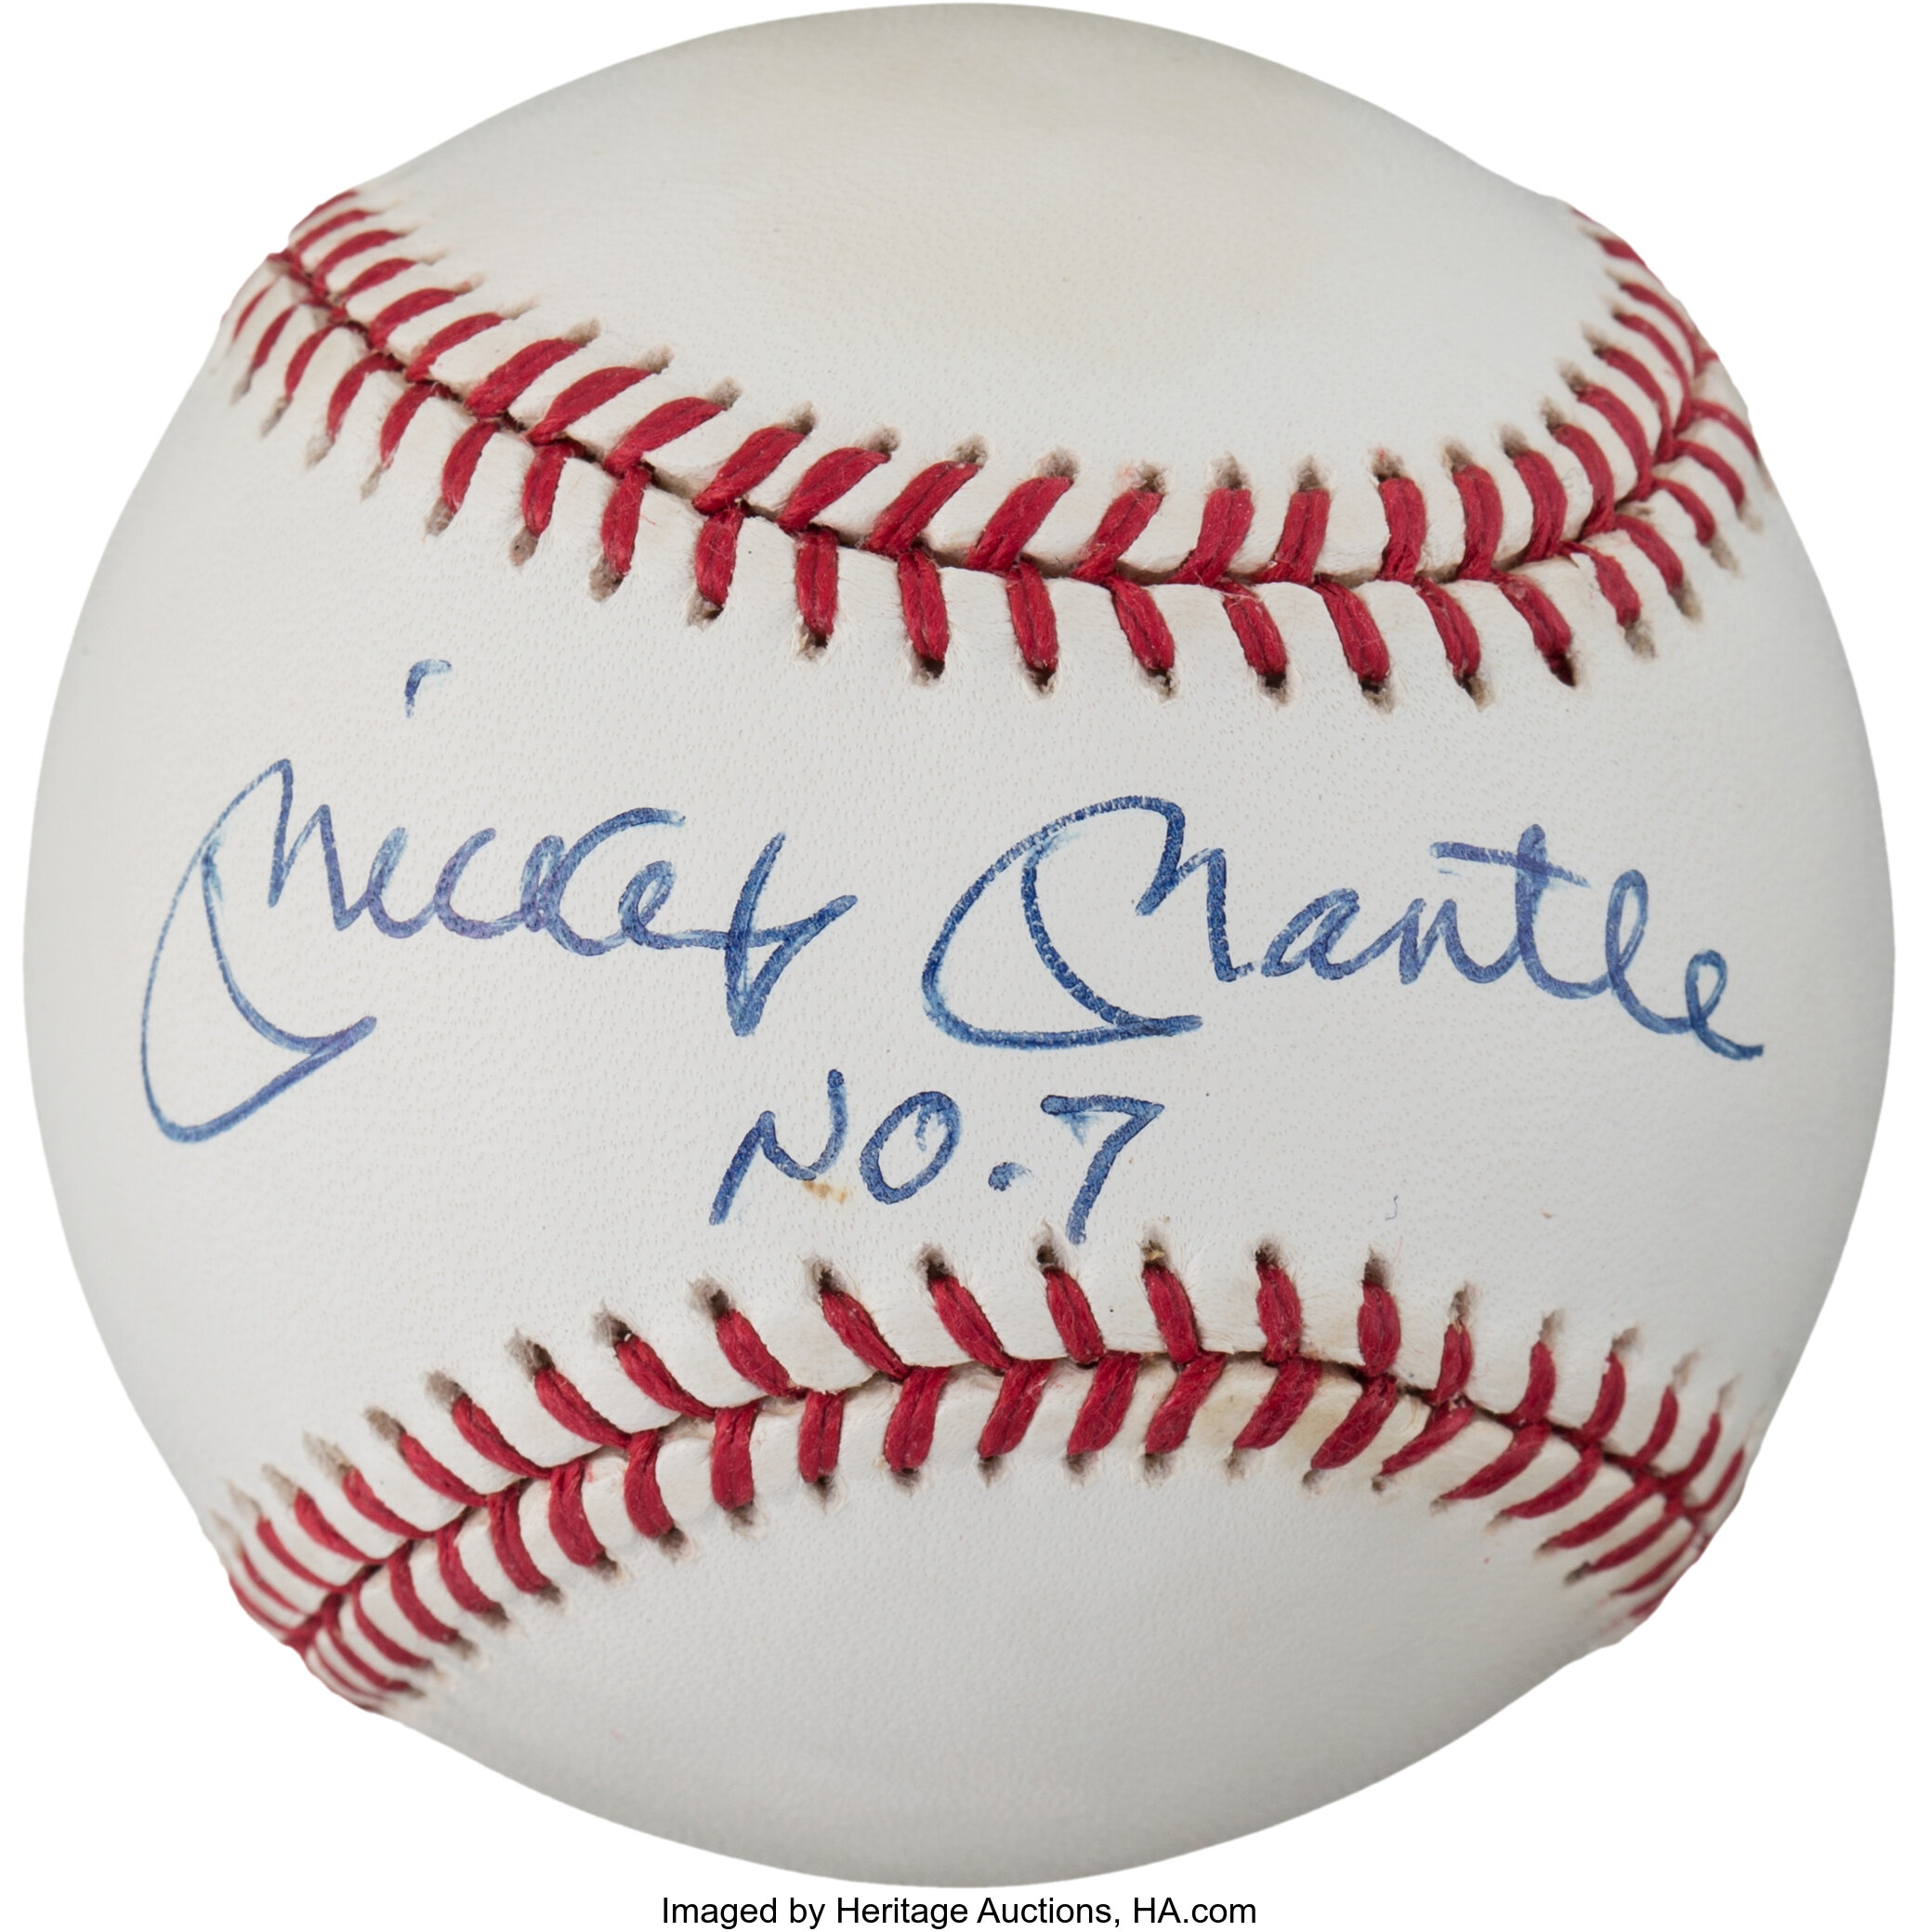 Charitybuzz: Mickey Mantle Signed & Inscribed No. 7 Yankees